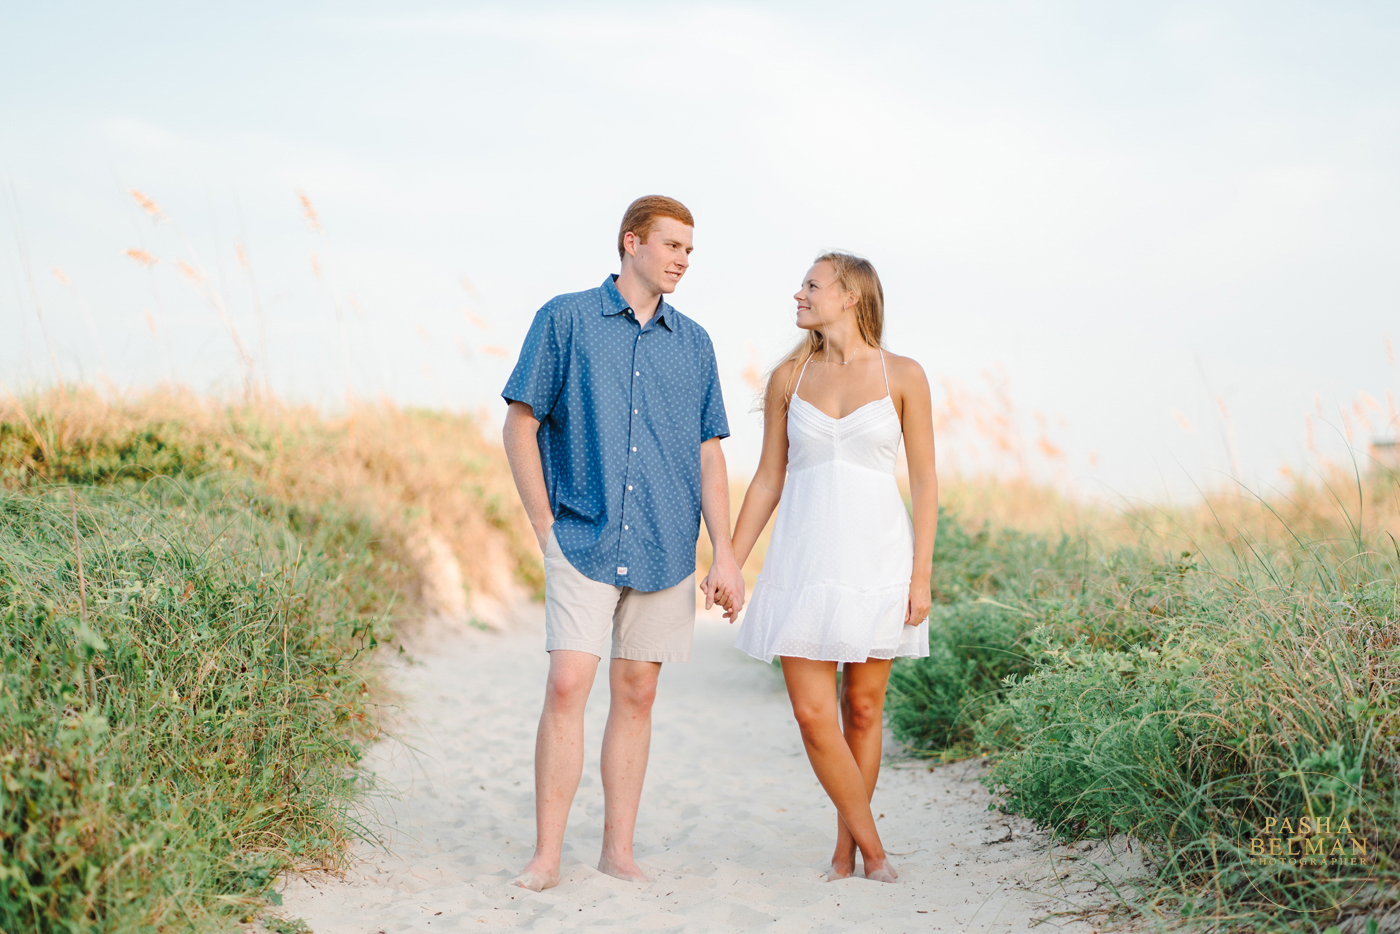 Adorable Couple Engagmenet Photos in White and Blue Outfits 